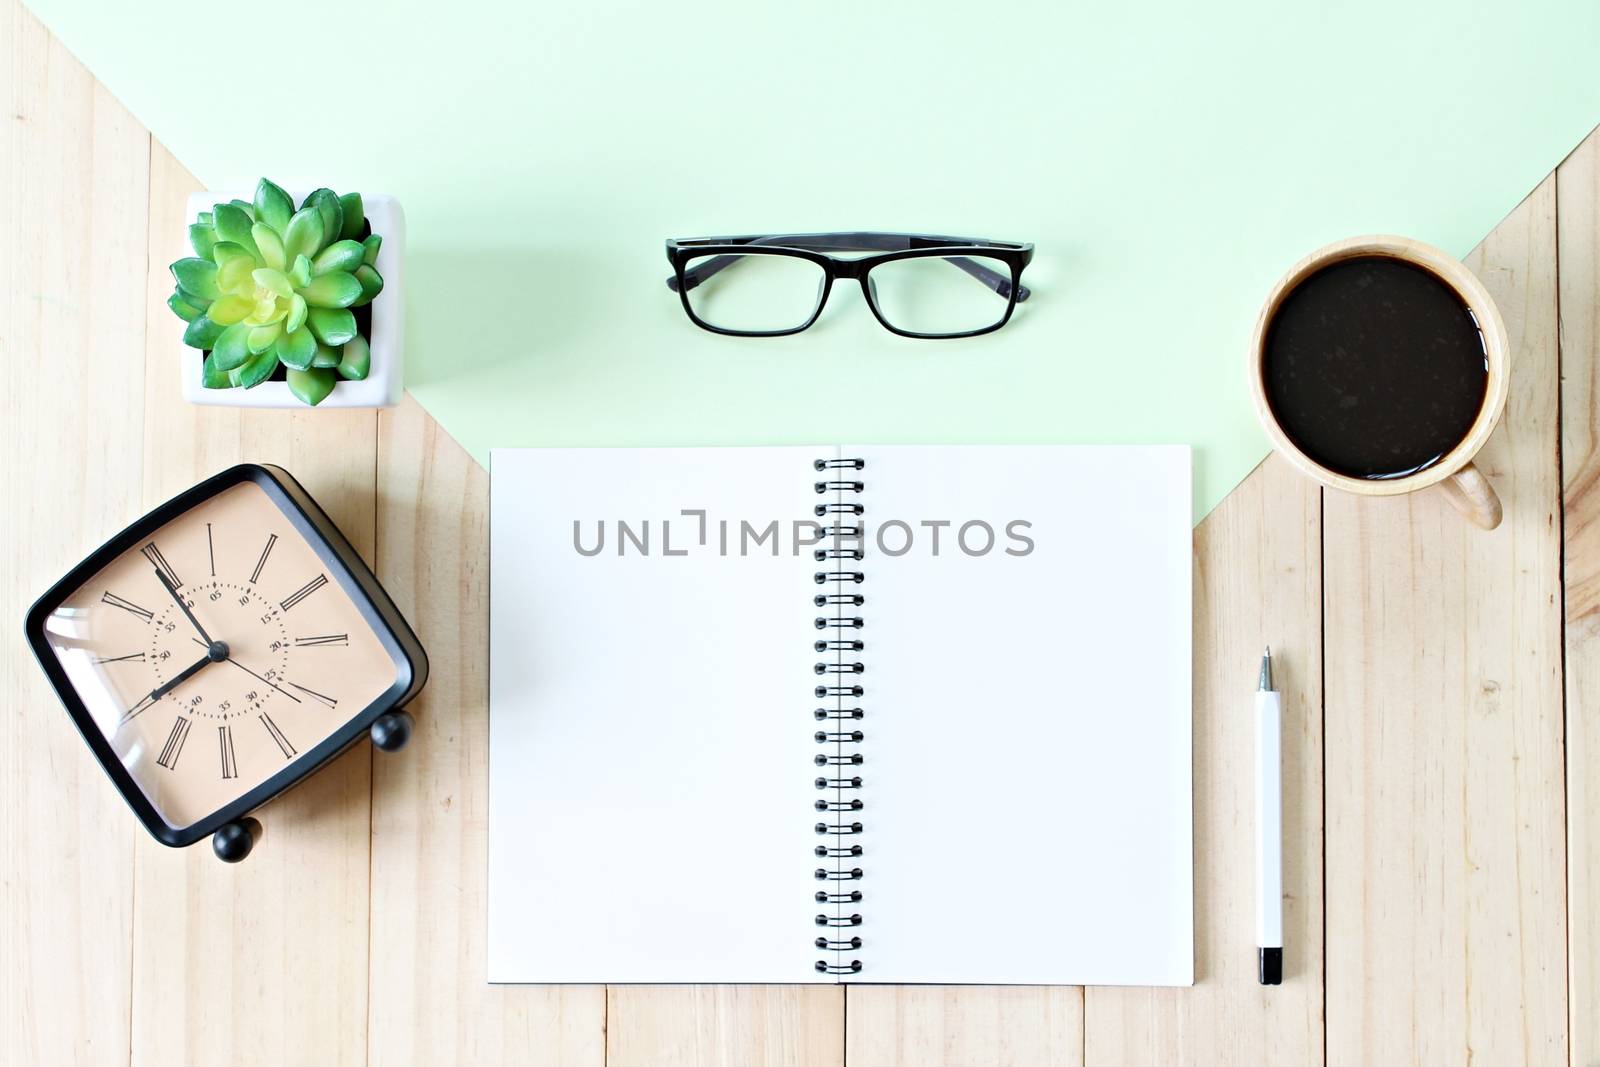 Still life, business, office supplies or education concept : Top view image of open notebook paper with blank pages, accessories and coffee cup on wooden background, ready for adding or mock up